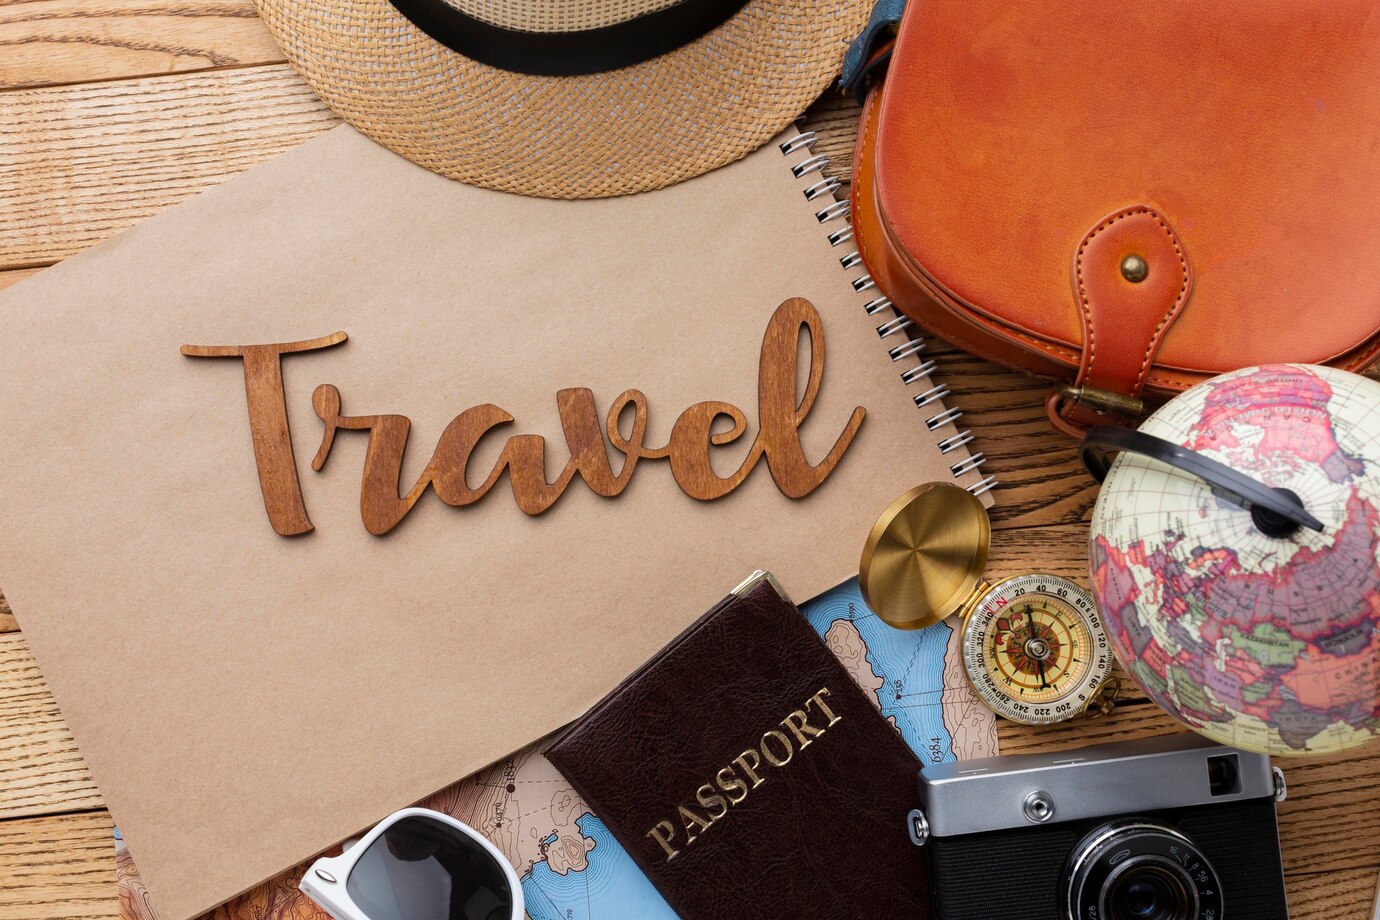 travel items on wooden background top view 23 2148971054